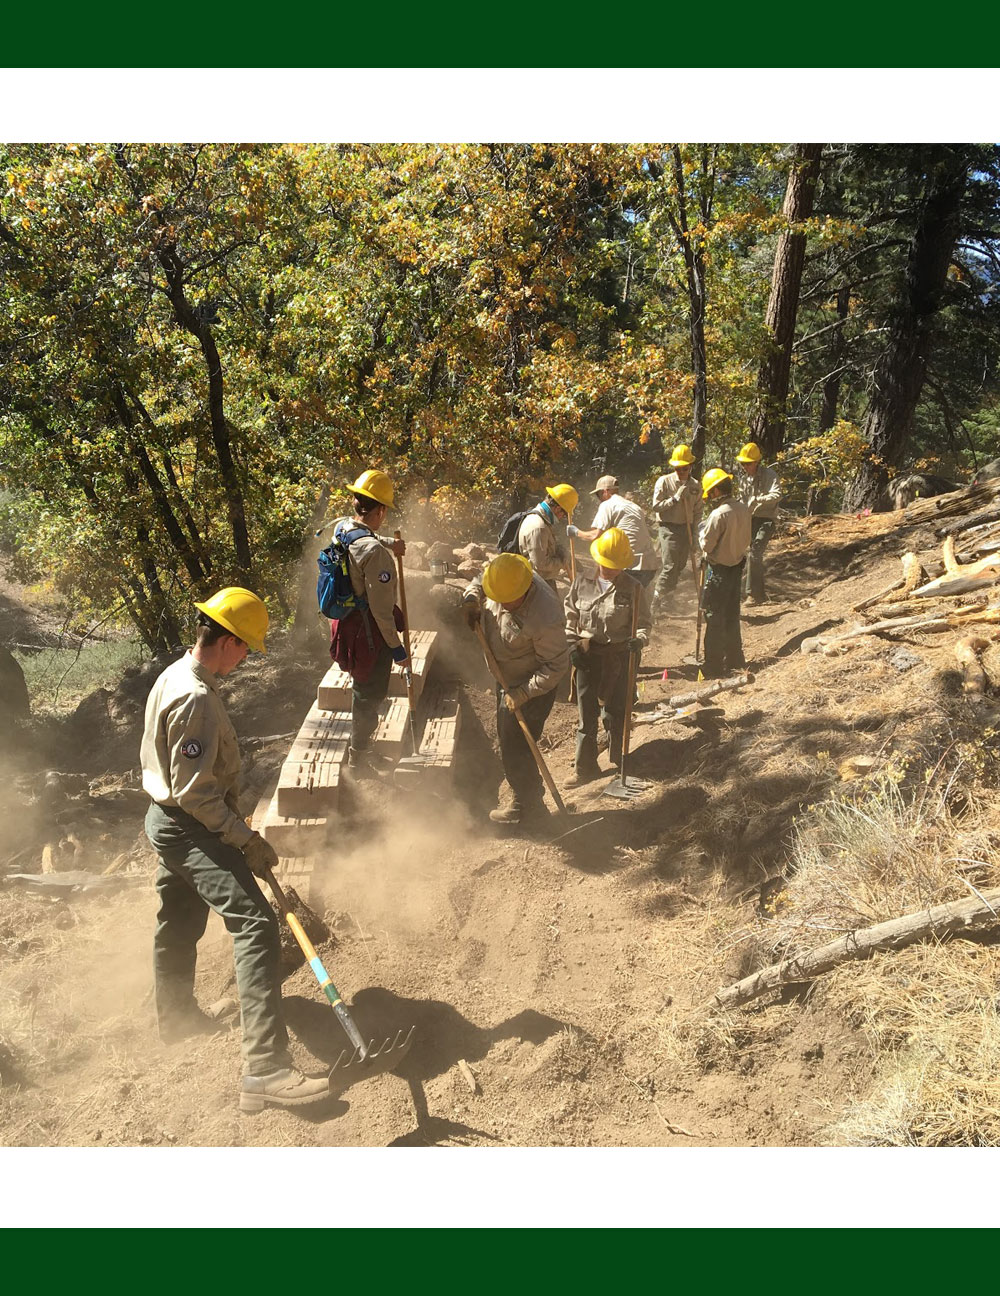 program or initiative focused on hiring individuals who have completed service in a conservation corps